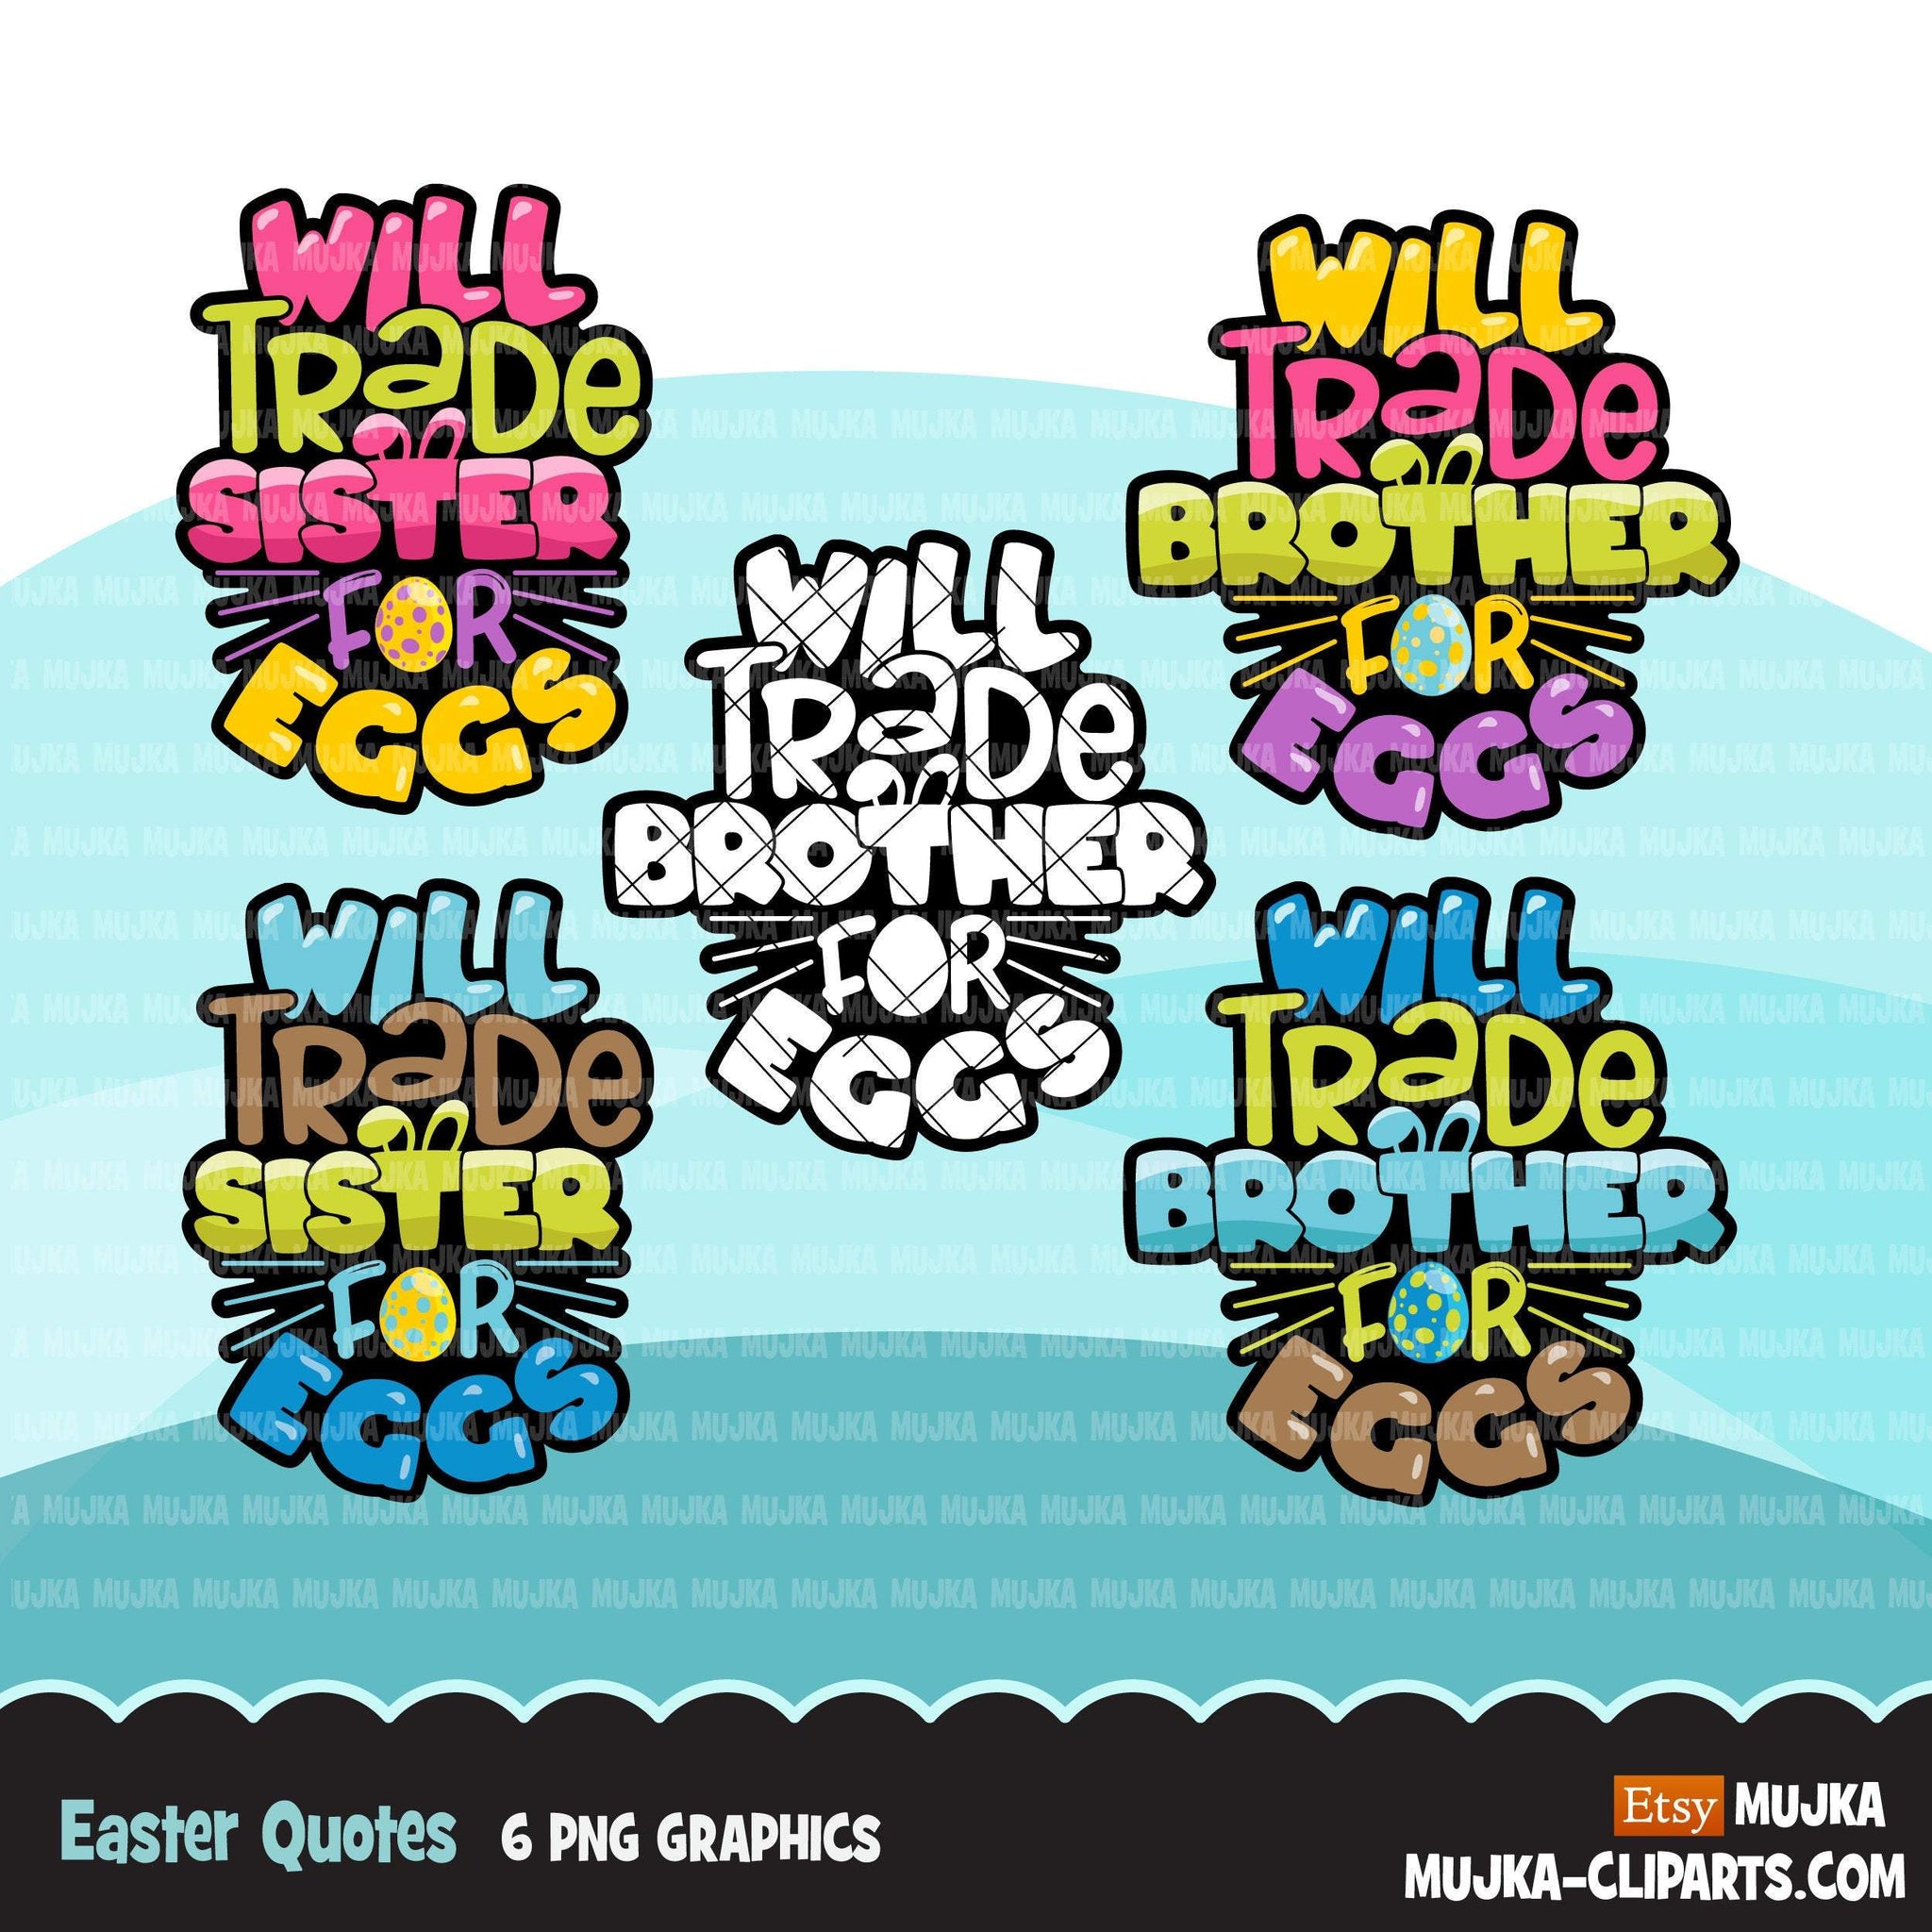 Easter Quotes Clipart, Will trade sister for eggs, will trade brother graphics, sublimation  commercial use clip art